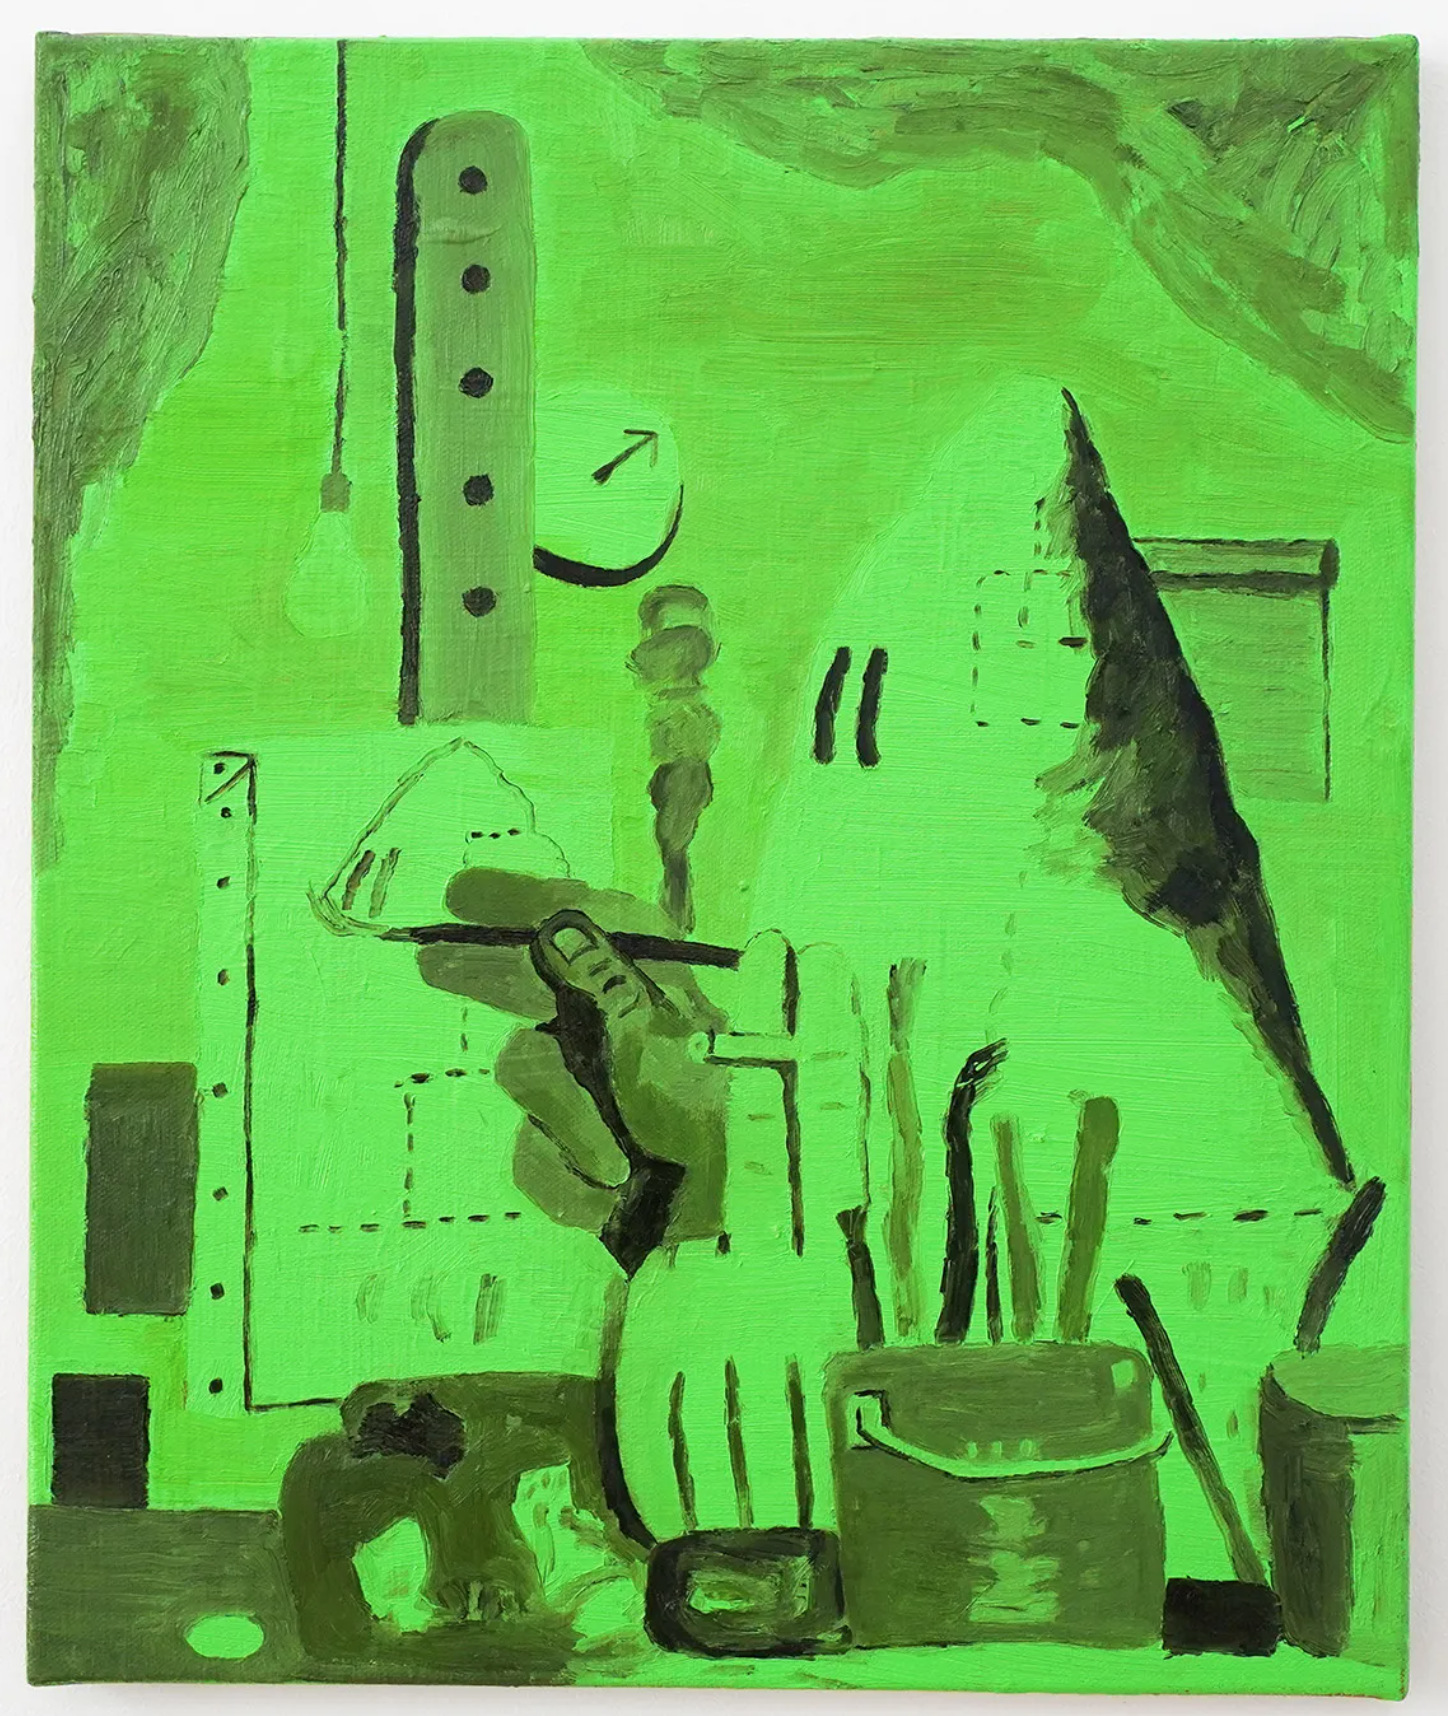 Dieter Durinck – Green Doesn’t Sell (Philip Guston, The Studio, 1969) – 60x50cm Olieverf op canvas